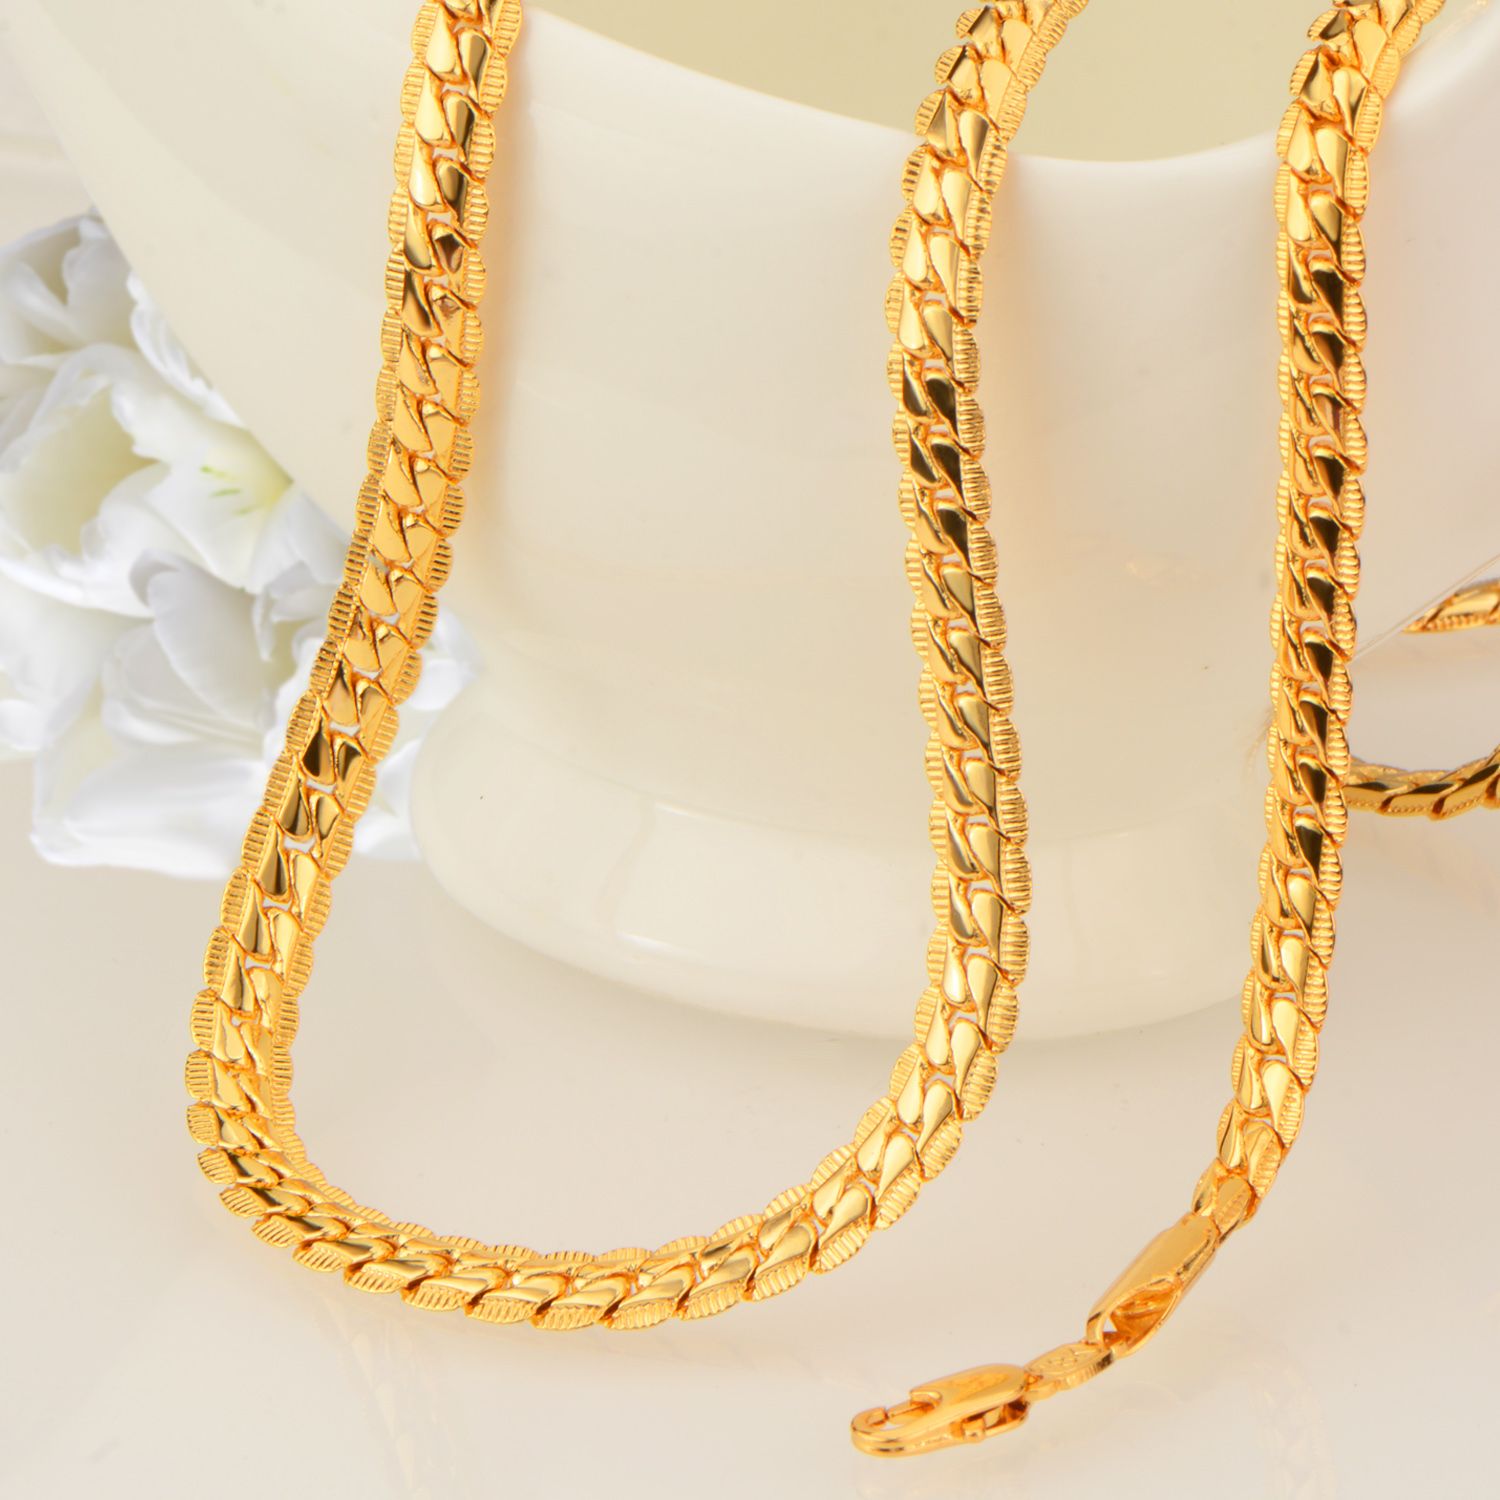 Styling a Mugappu Thali Chain - Transform Your Look Now!